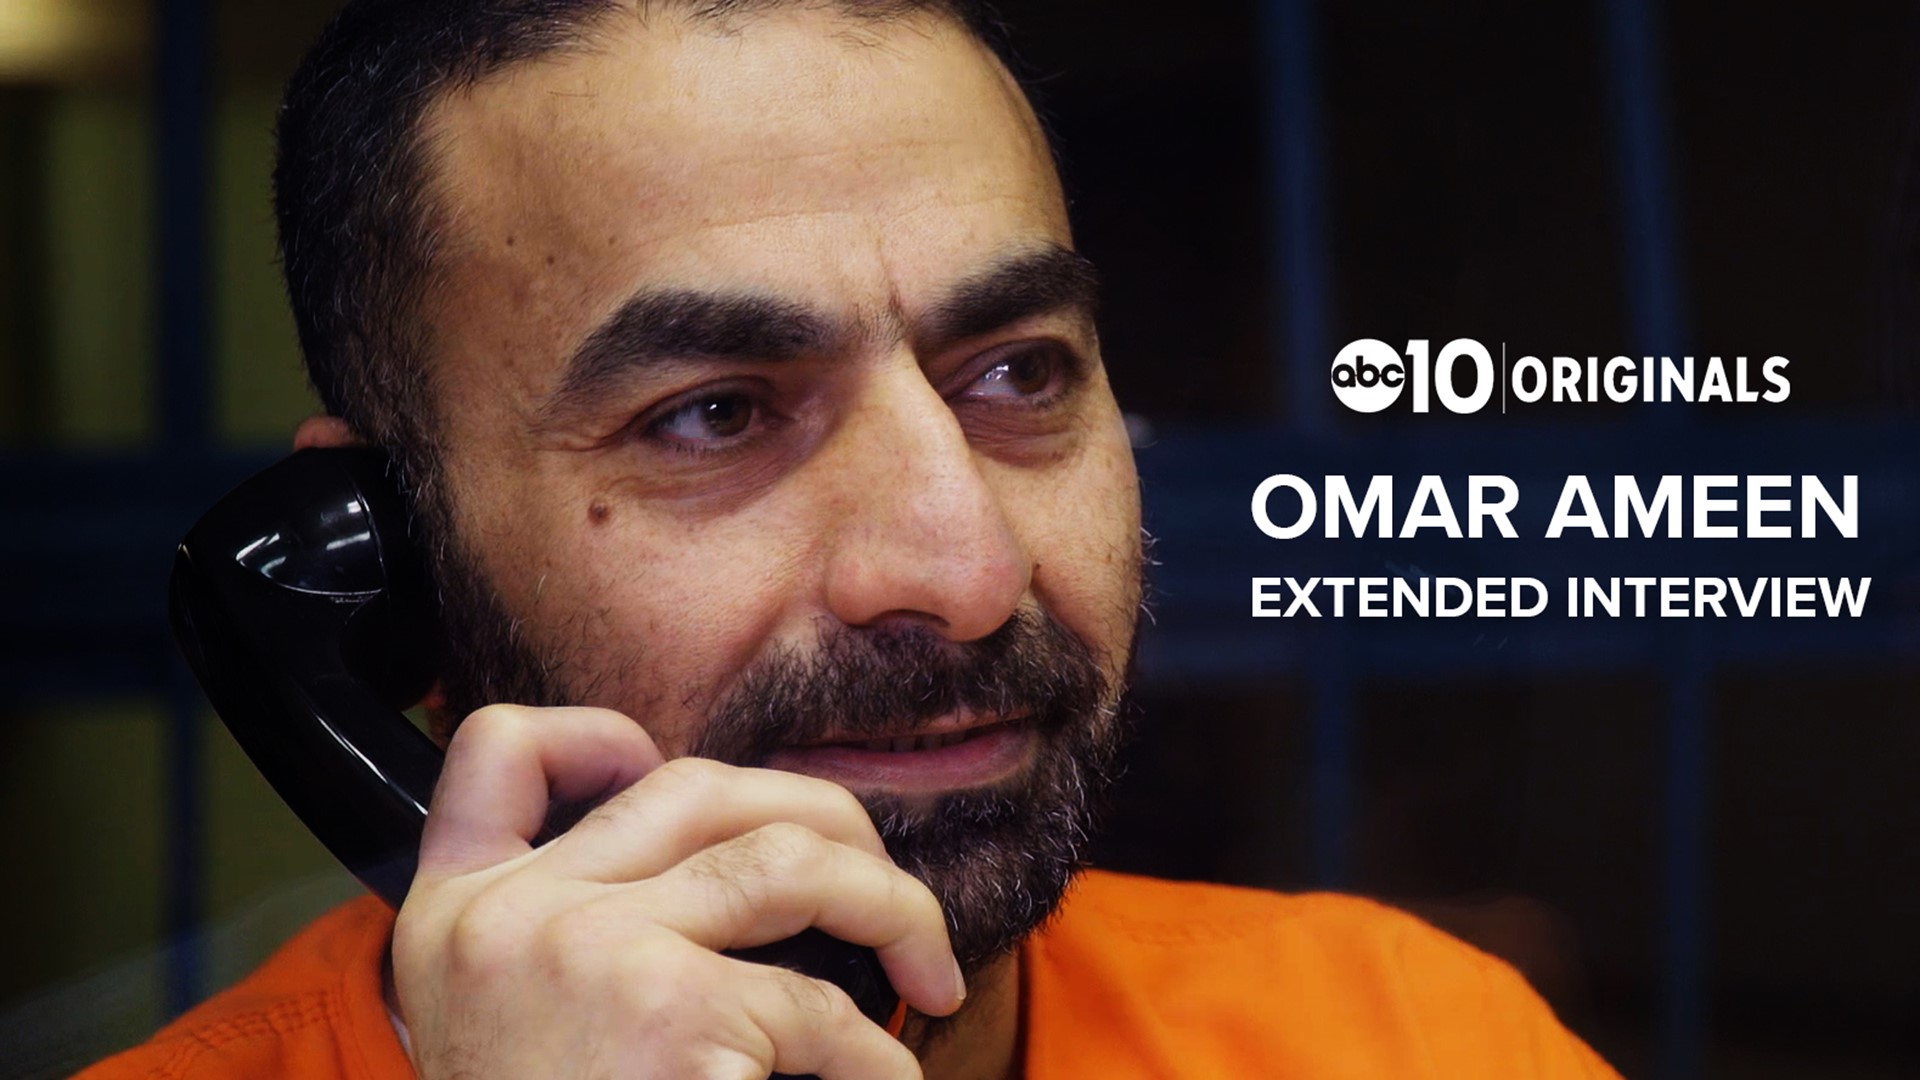 Suspect in the killing of an Iraqi police officer professes innocence. The Iraqi government insists that Sacramento resident Omar Ameen has been a member of Al Qaeda and ISIS. This is the complete, exclusive jailhouse interview with ABC10 correspondent, Michael Anthony Adams.